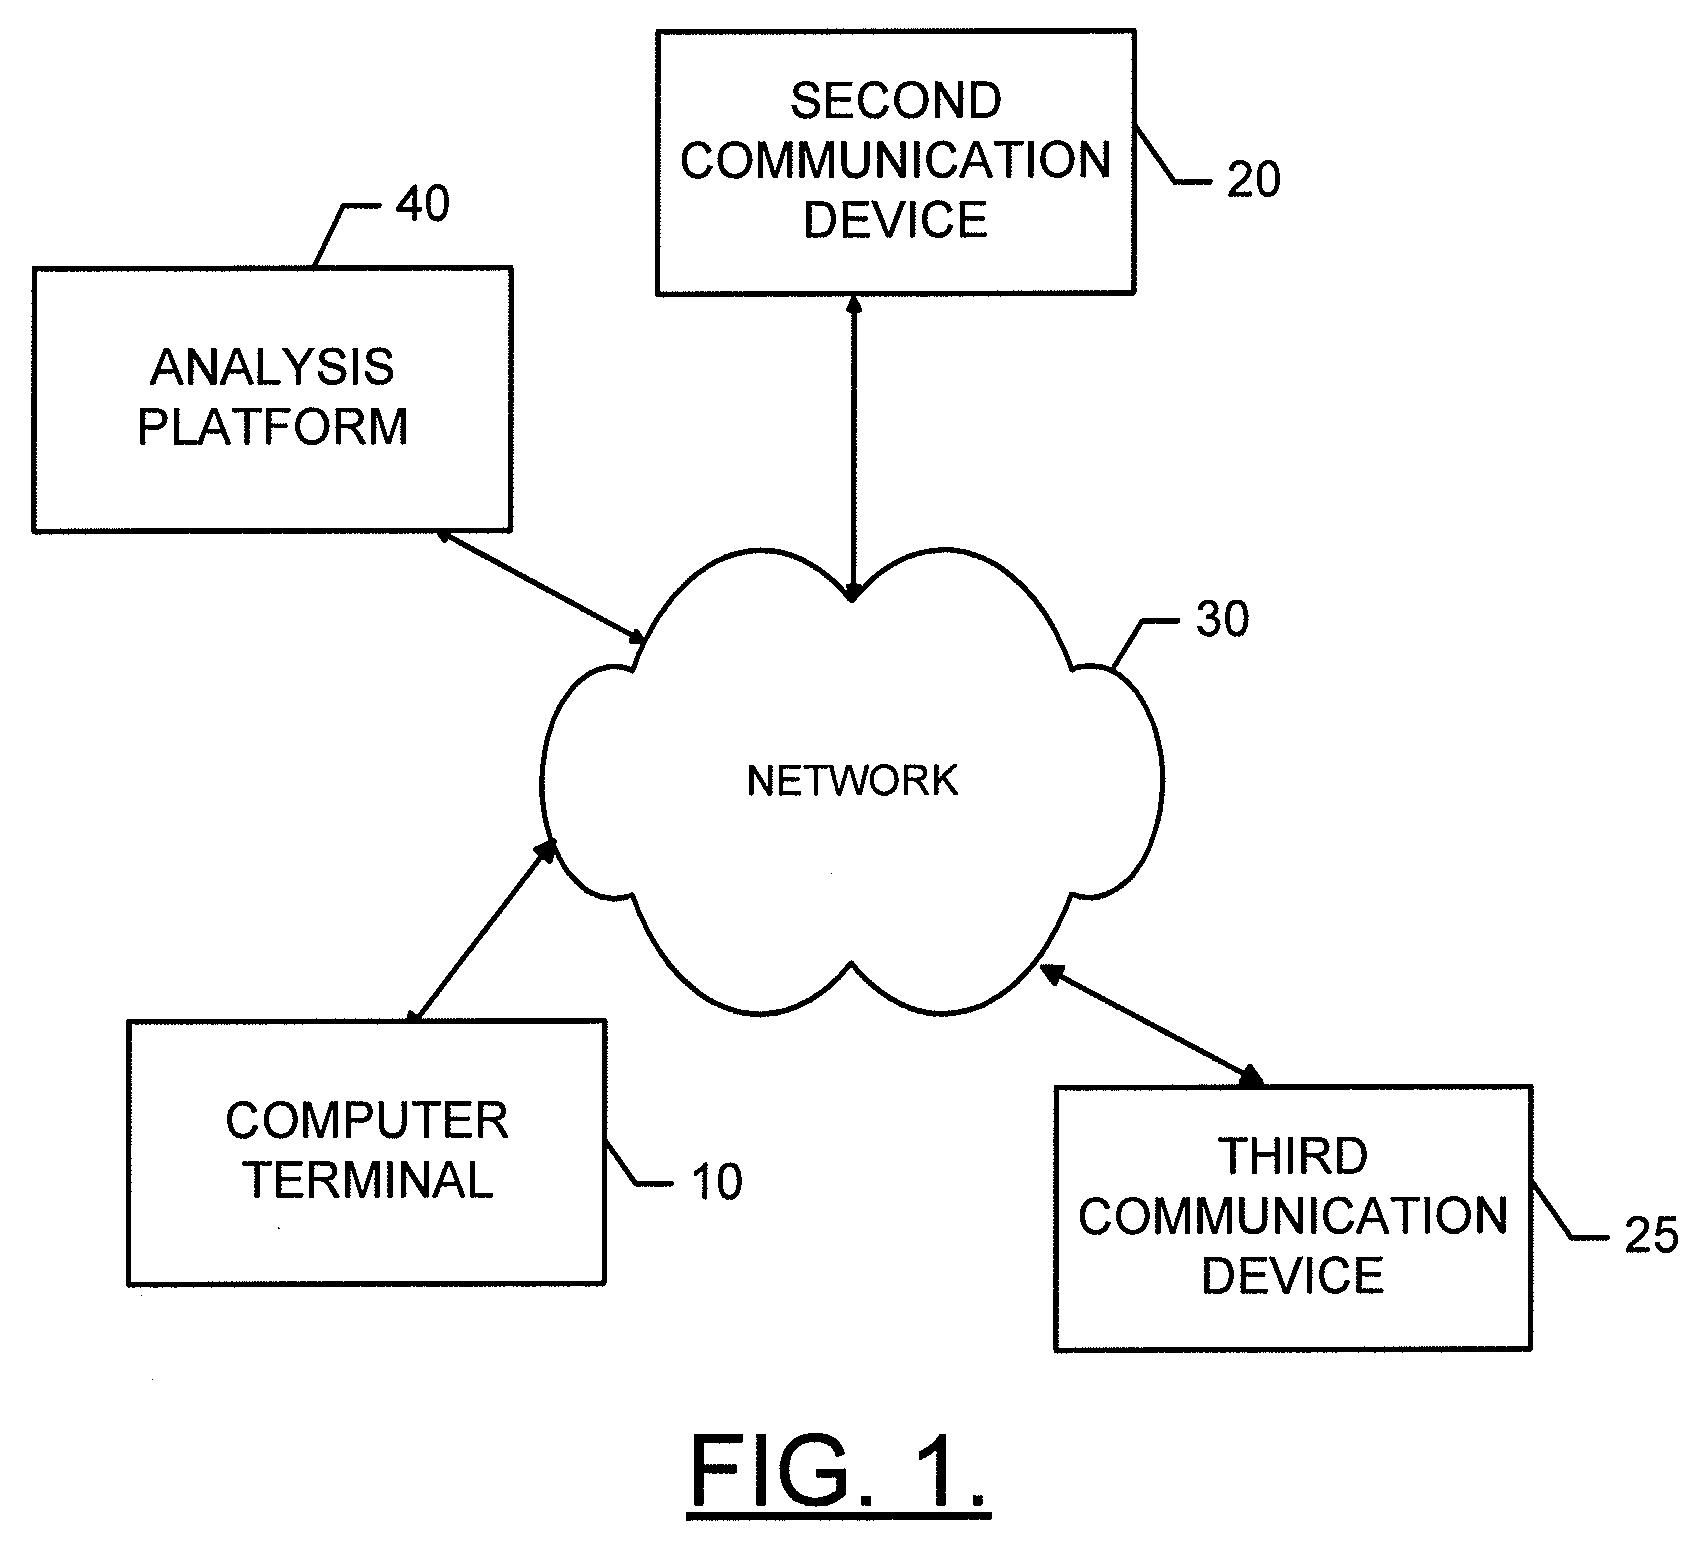 Method, computer program product and apparatus for providing a threat detection system